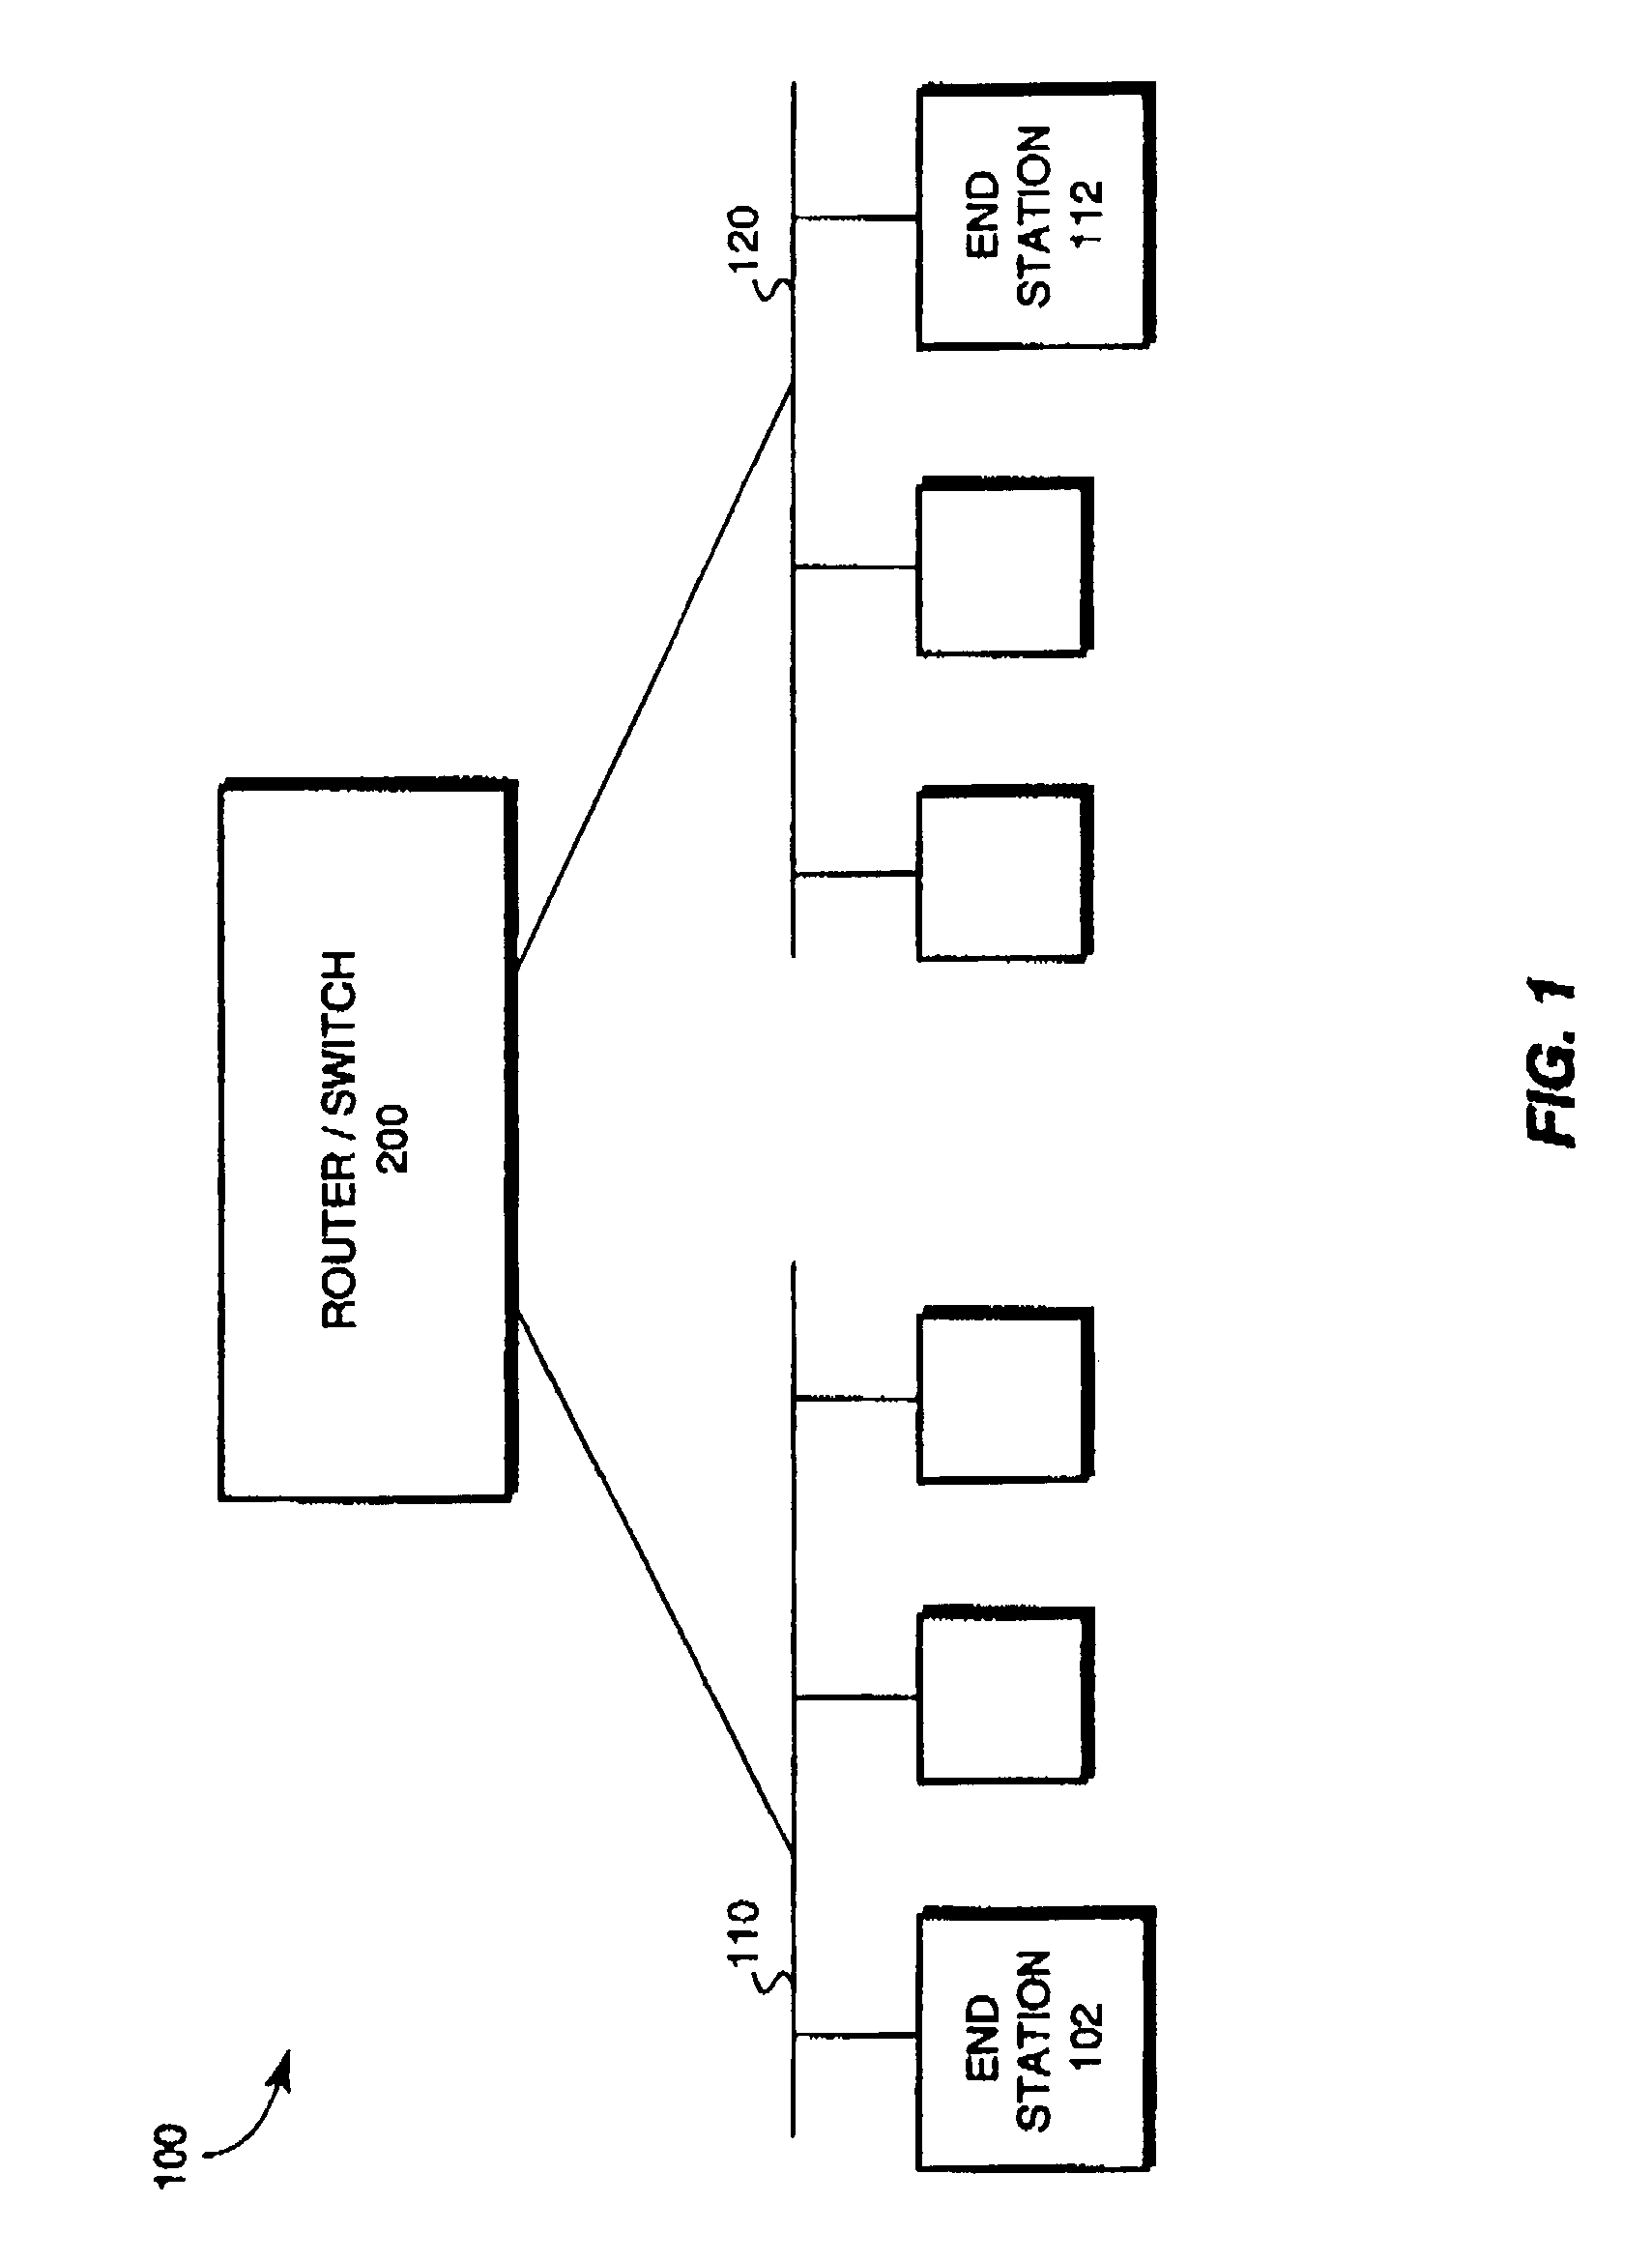 Programmable arrayed processing engine architecture for a network switch